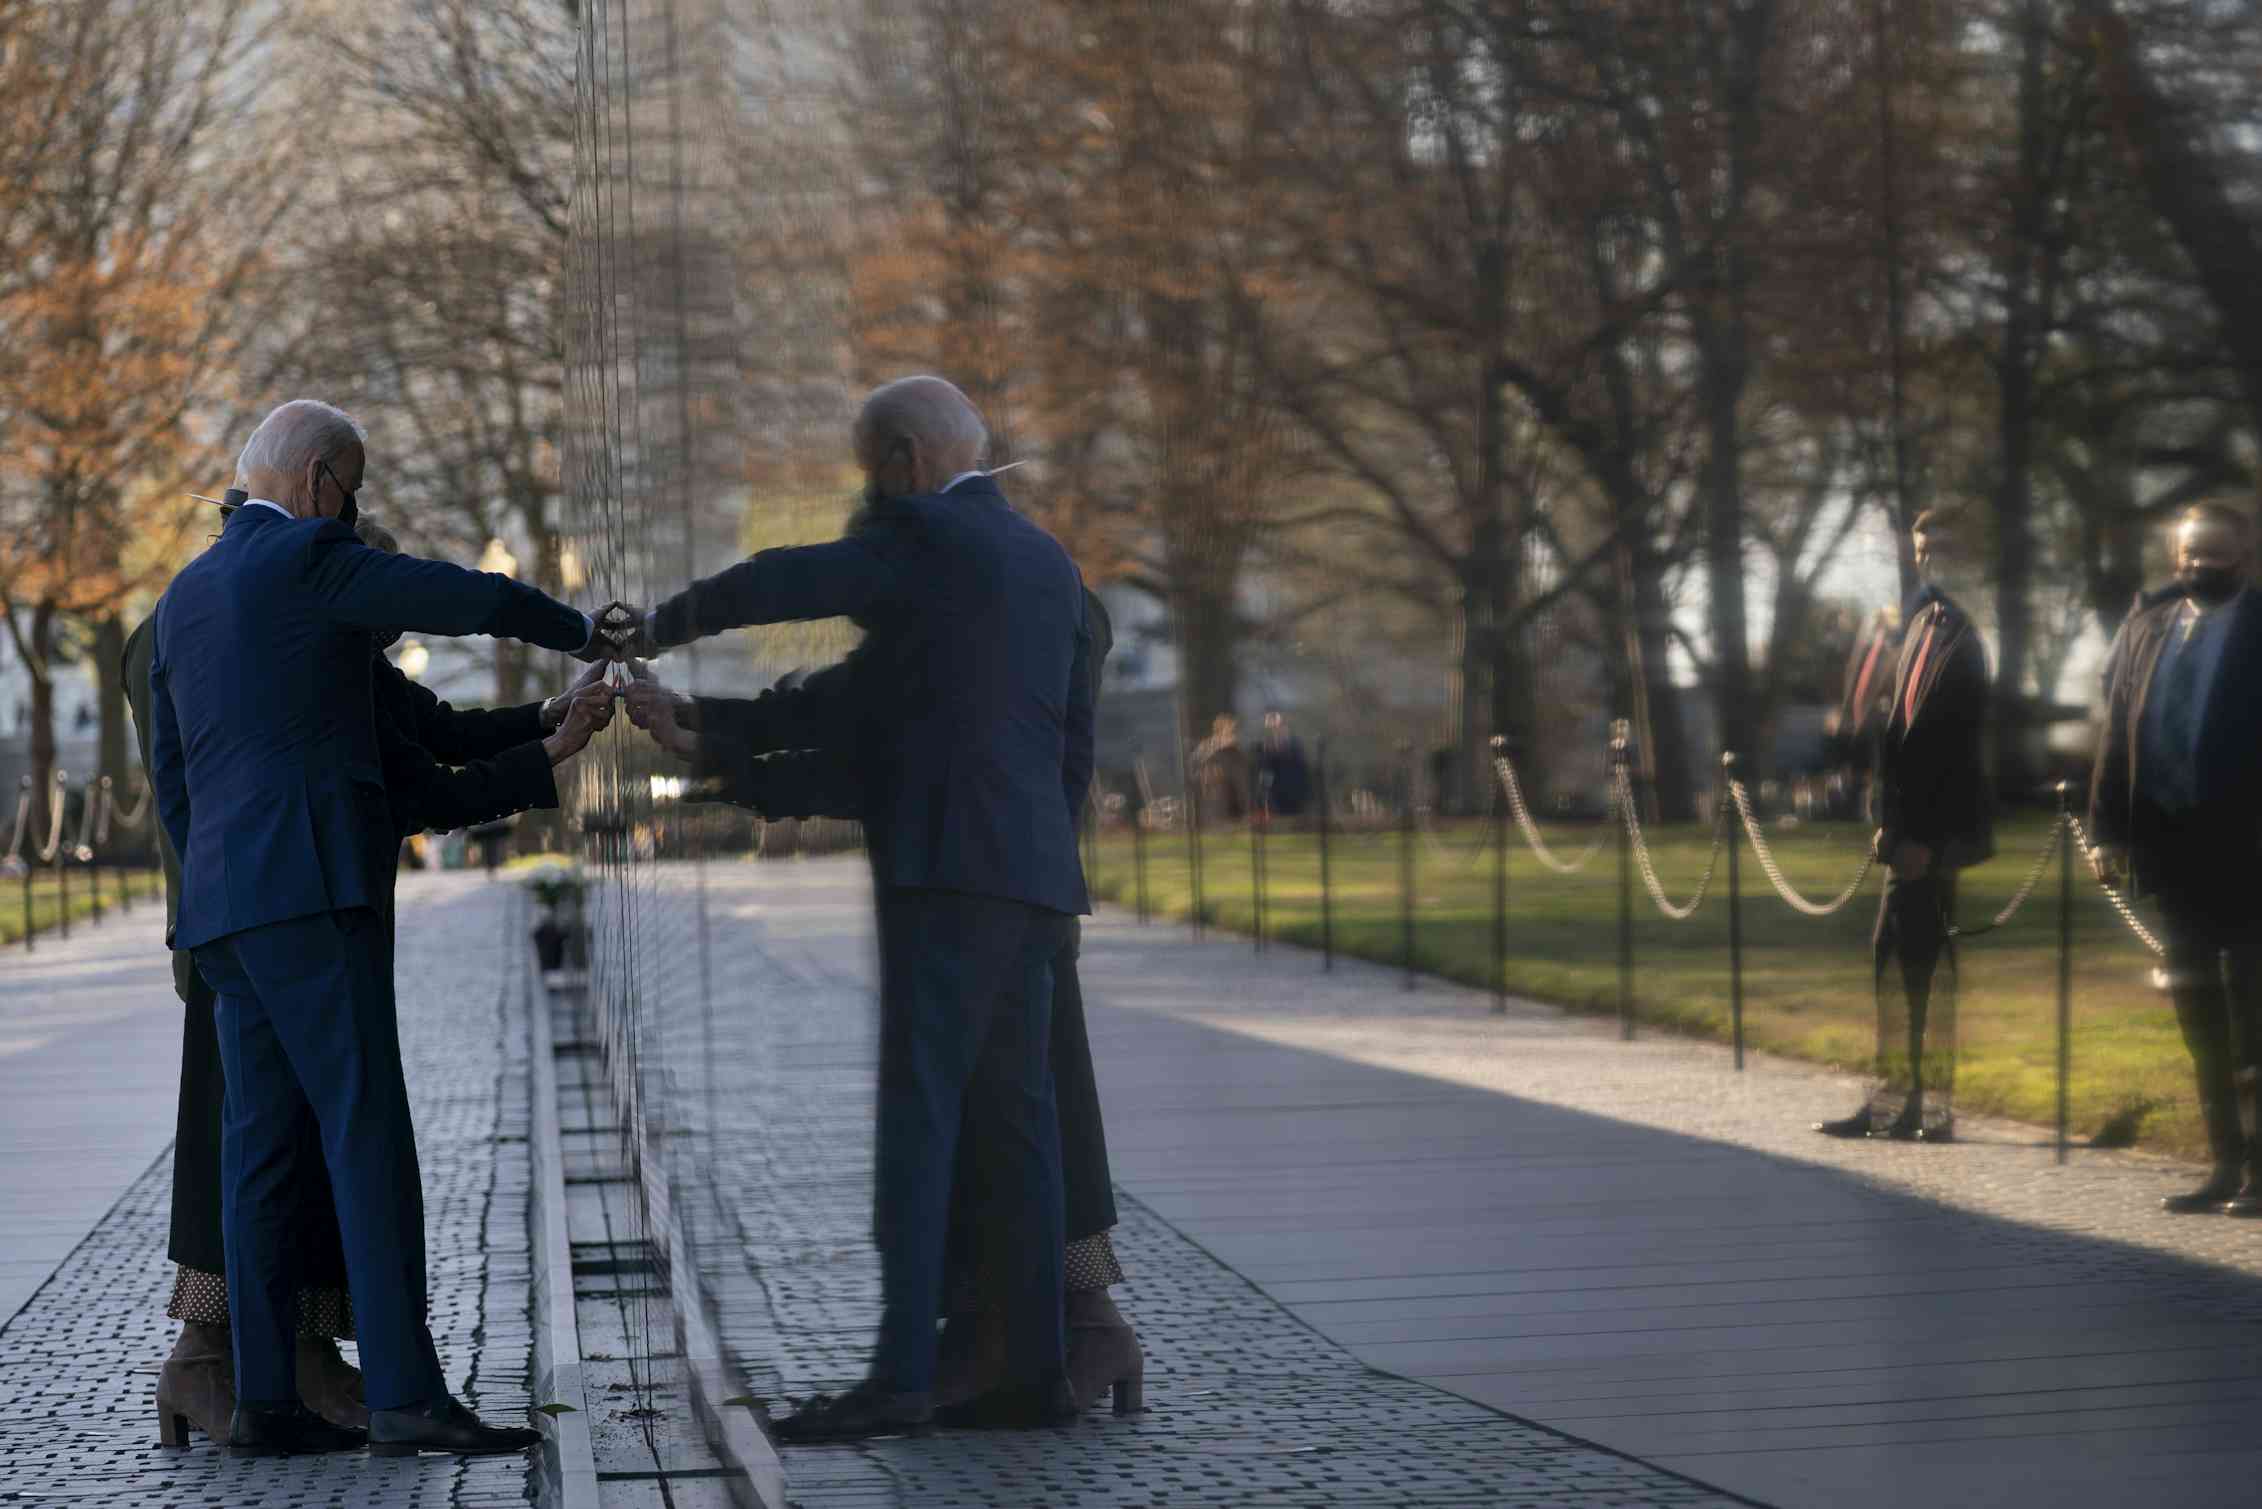 A man and woman touch the etchings of names on a war memorial, their reflections visible in the polished stone.